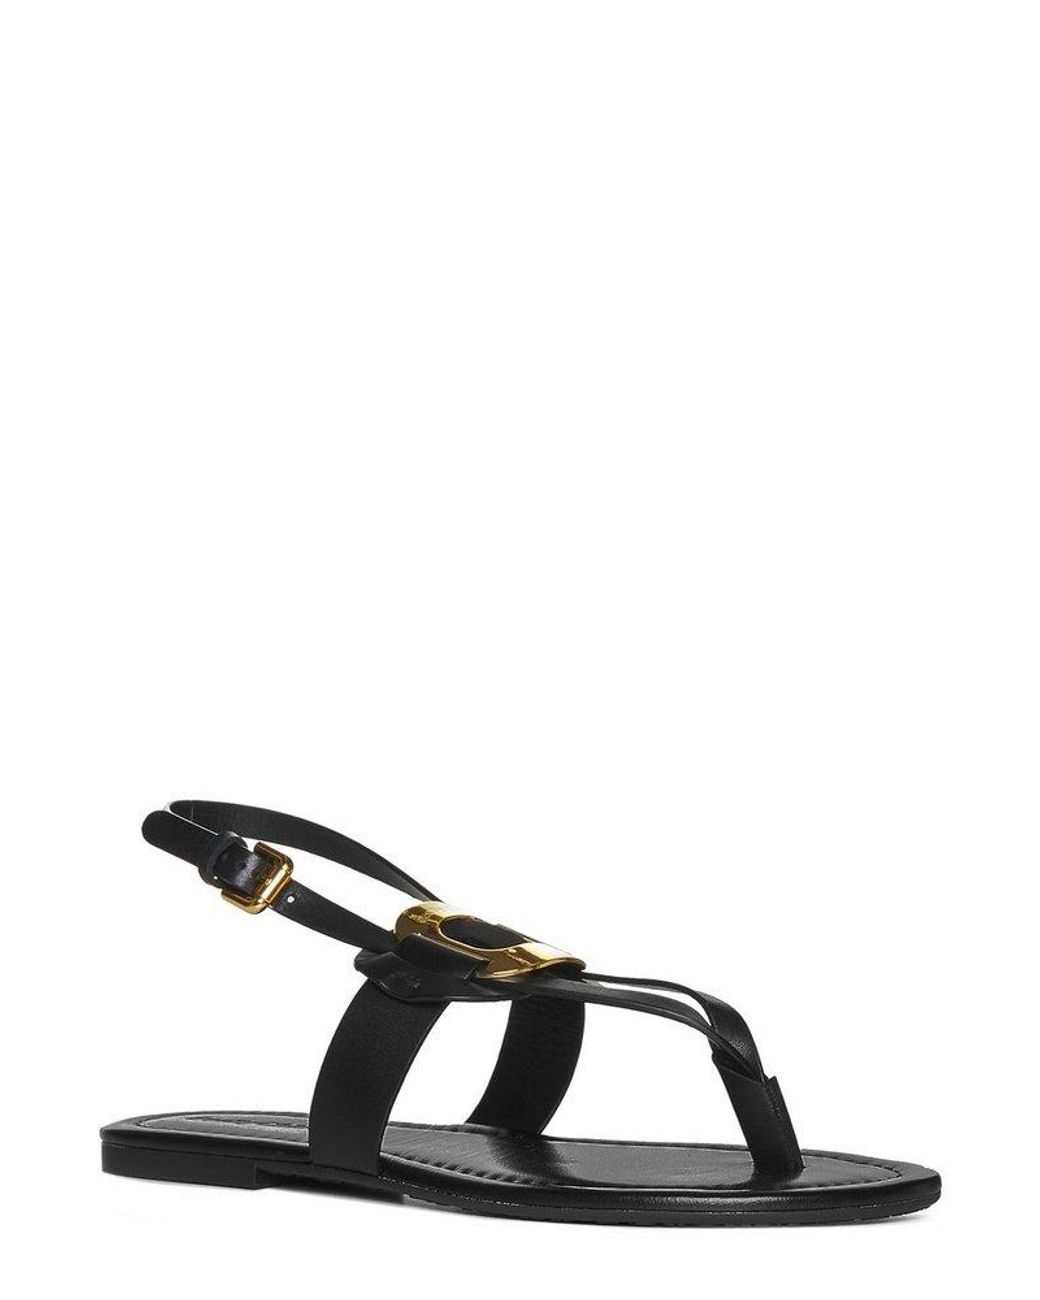 See By Chloé Logo Engraved Slingback Sandals in Black | Lyst